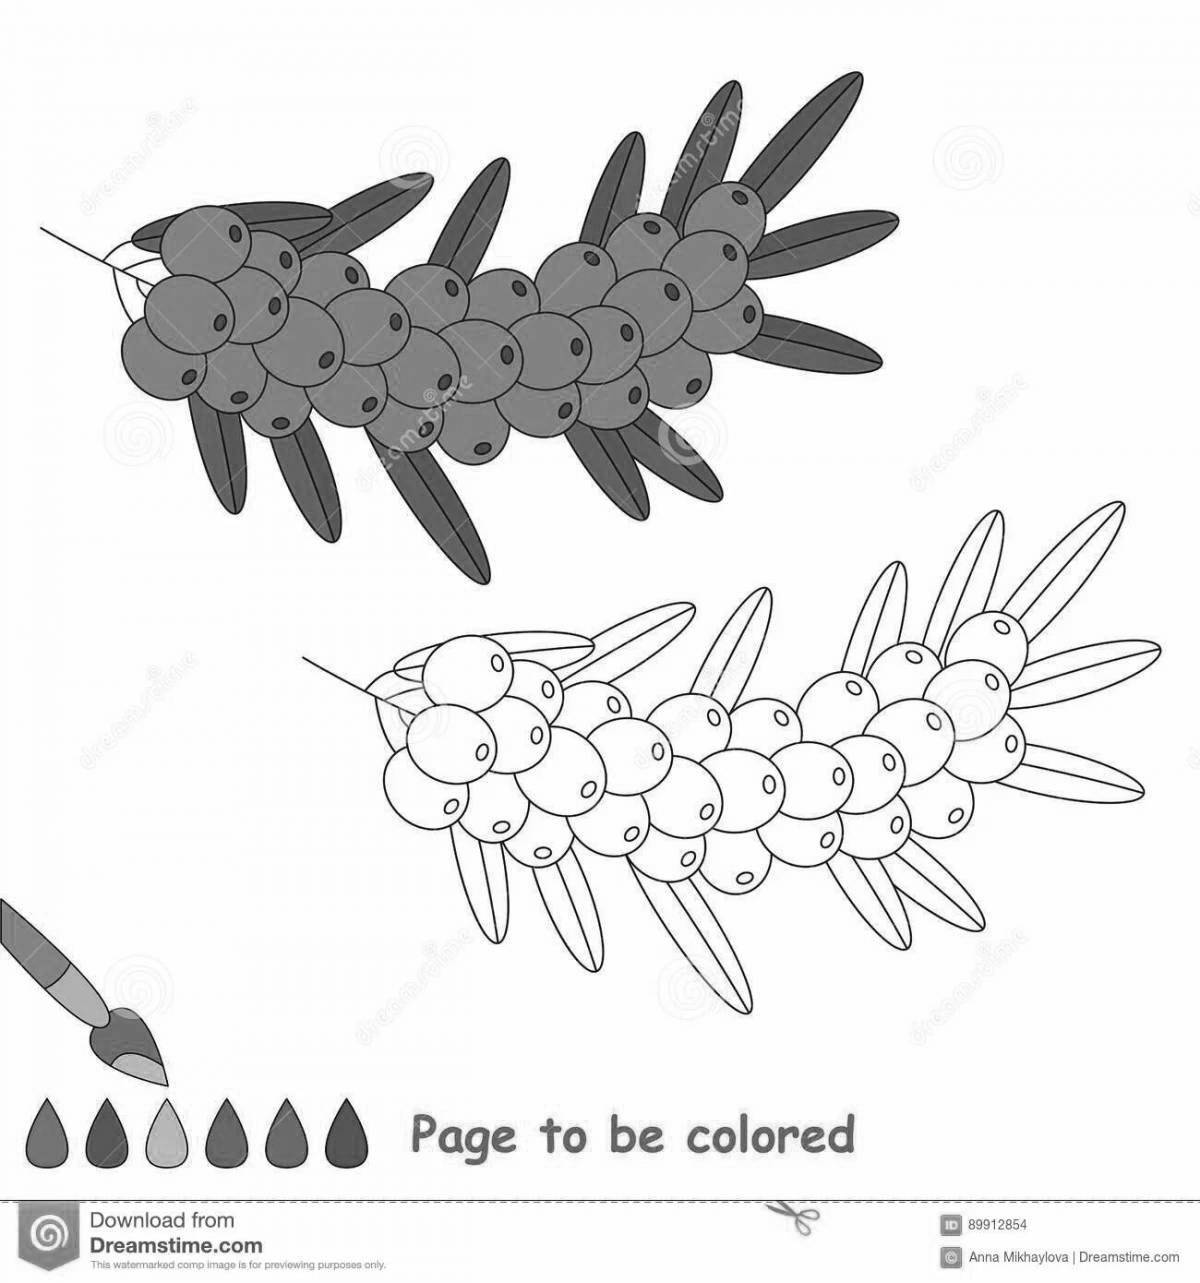 Amazing sea buckthorn coloring page for kids